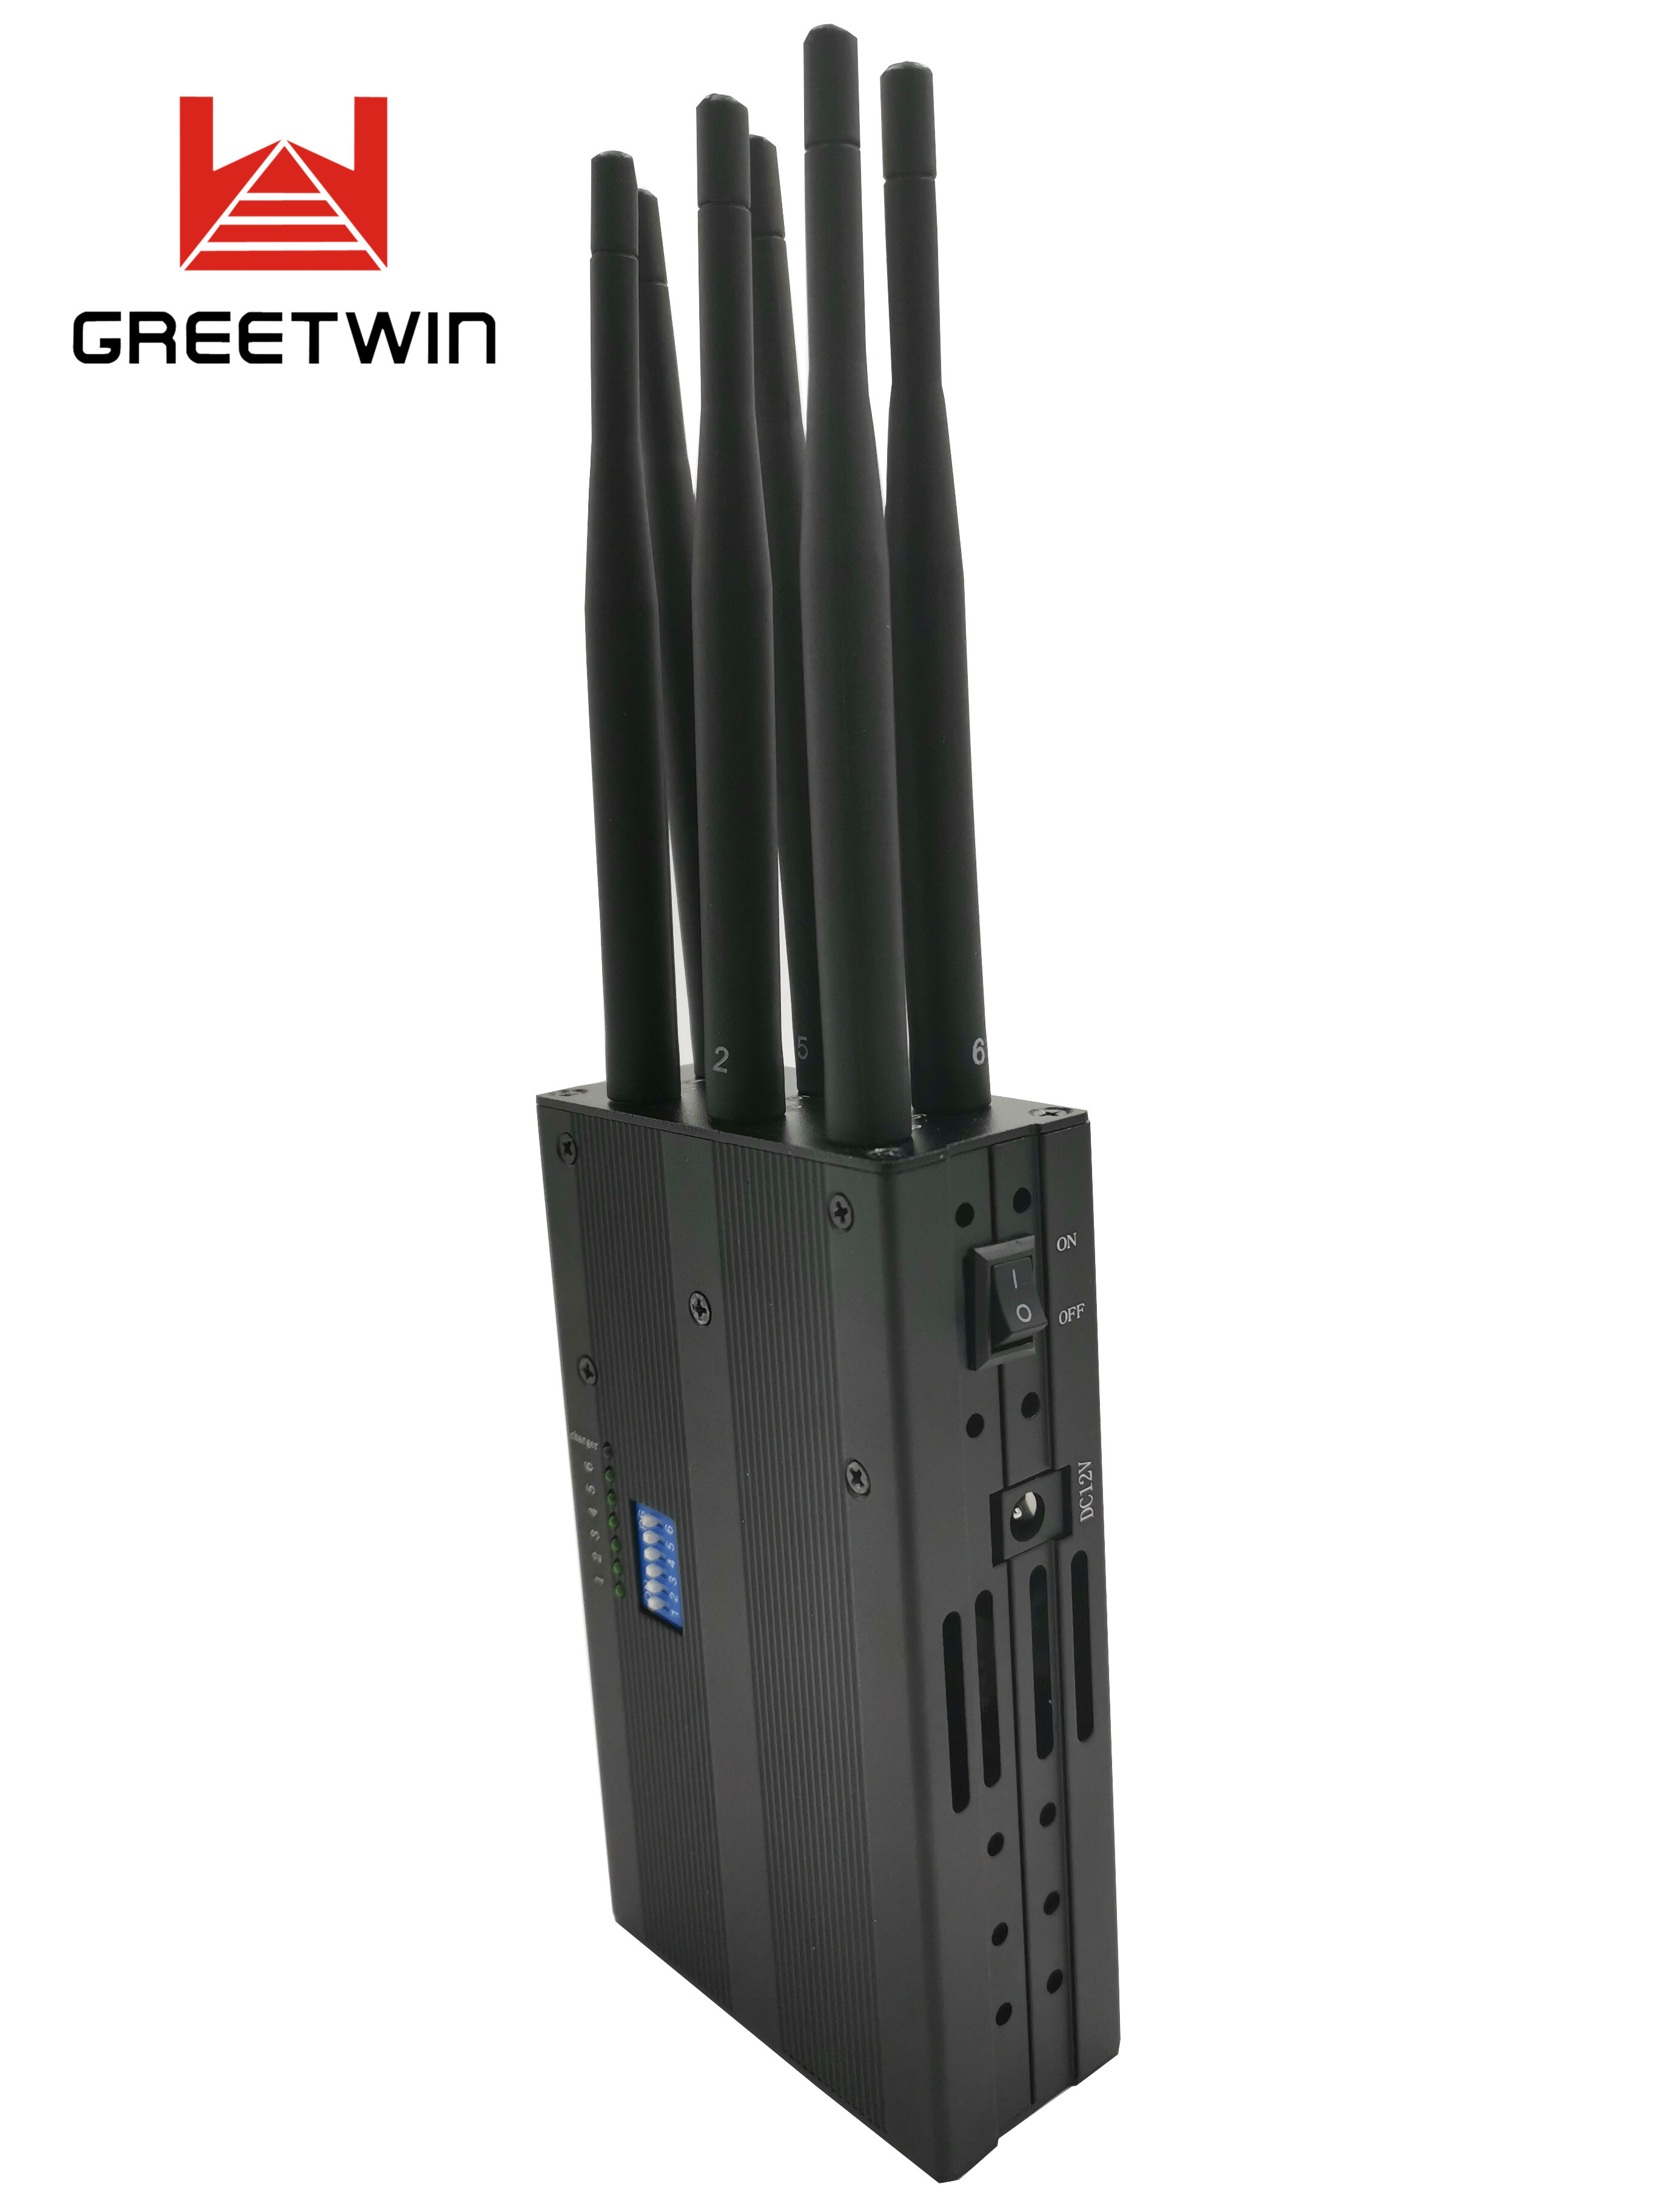 Compact Cell Phone Signal Jammer With 6 Antennas Jam All Europe Frequency Bands